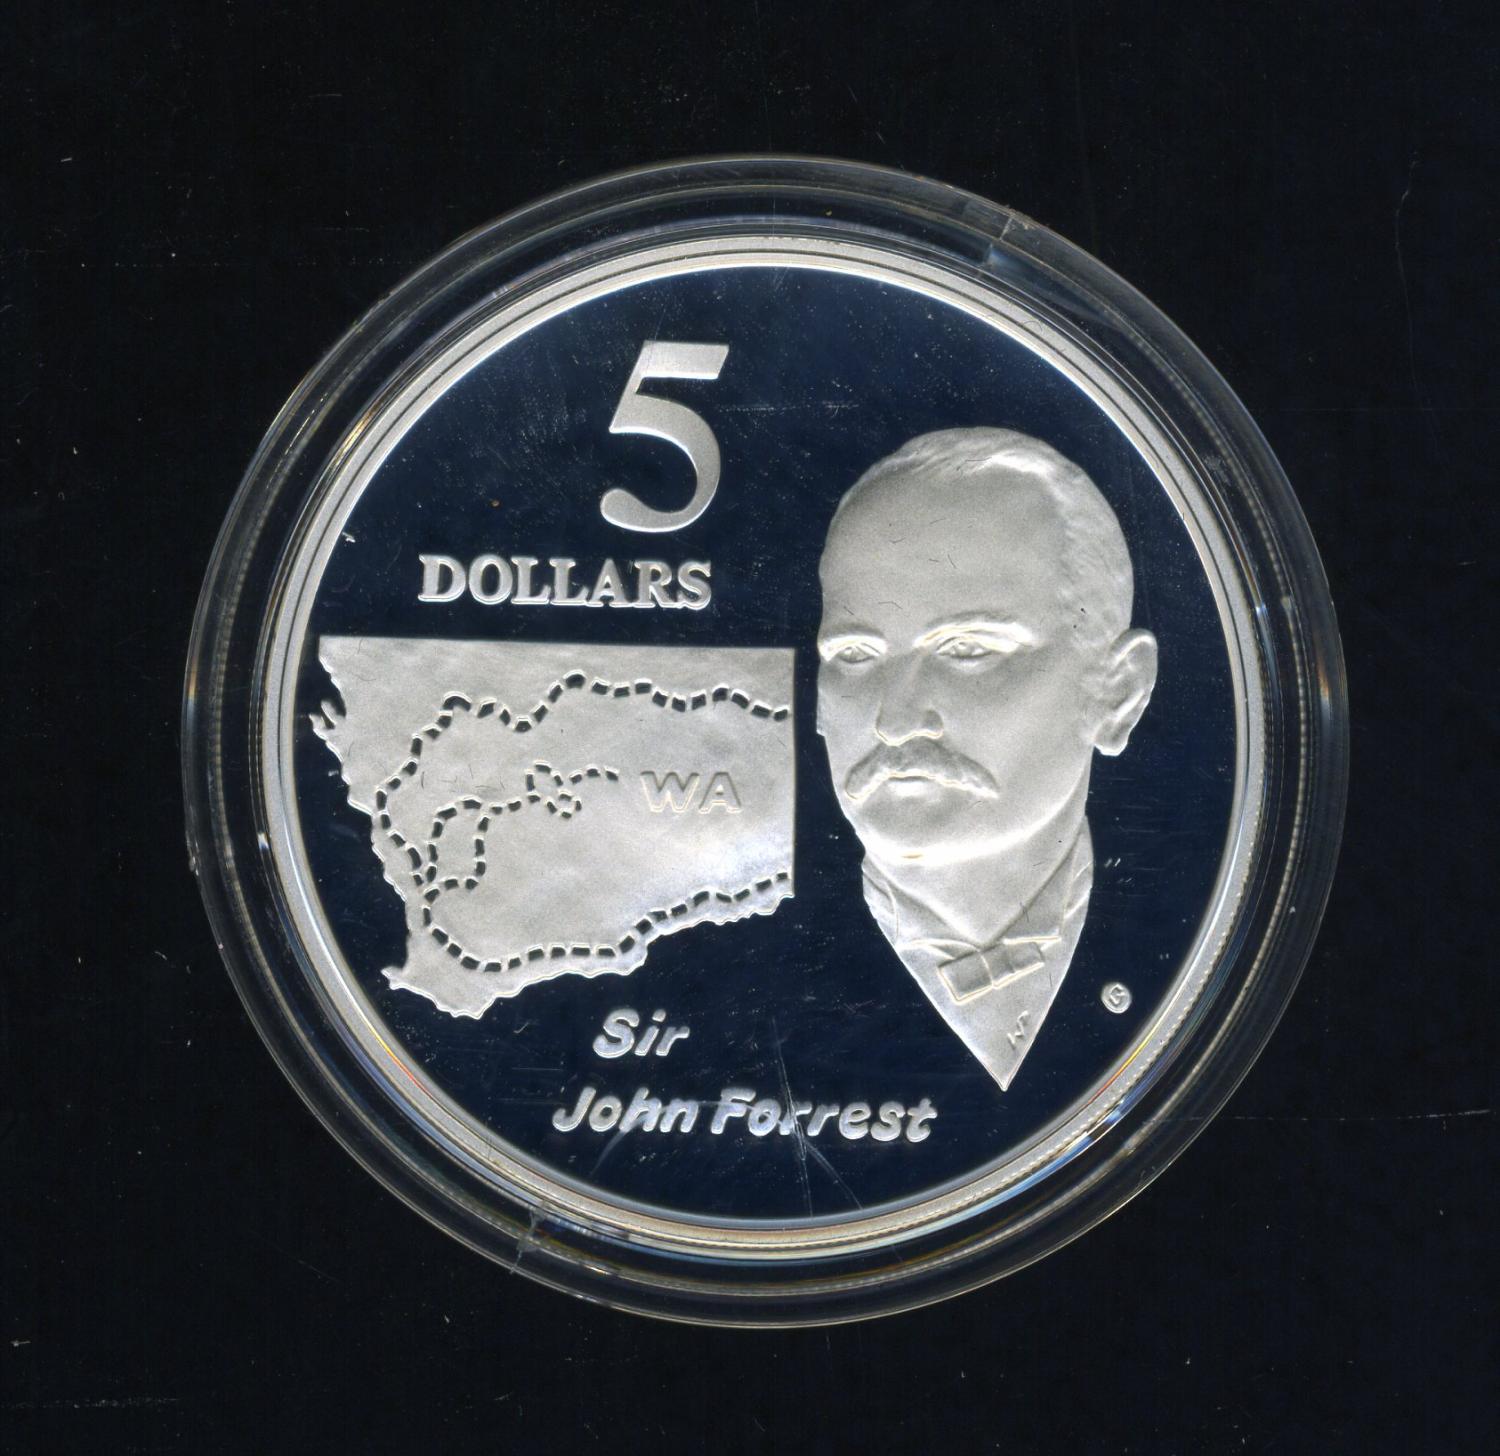 Thumbnail for 1994 Australian $5 Silver Coin From Masterpieces in Silver Set - John Forrest.  The Coin is Sterling Silver and contains over 1oz of Pure Silver.